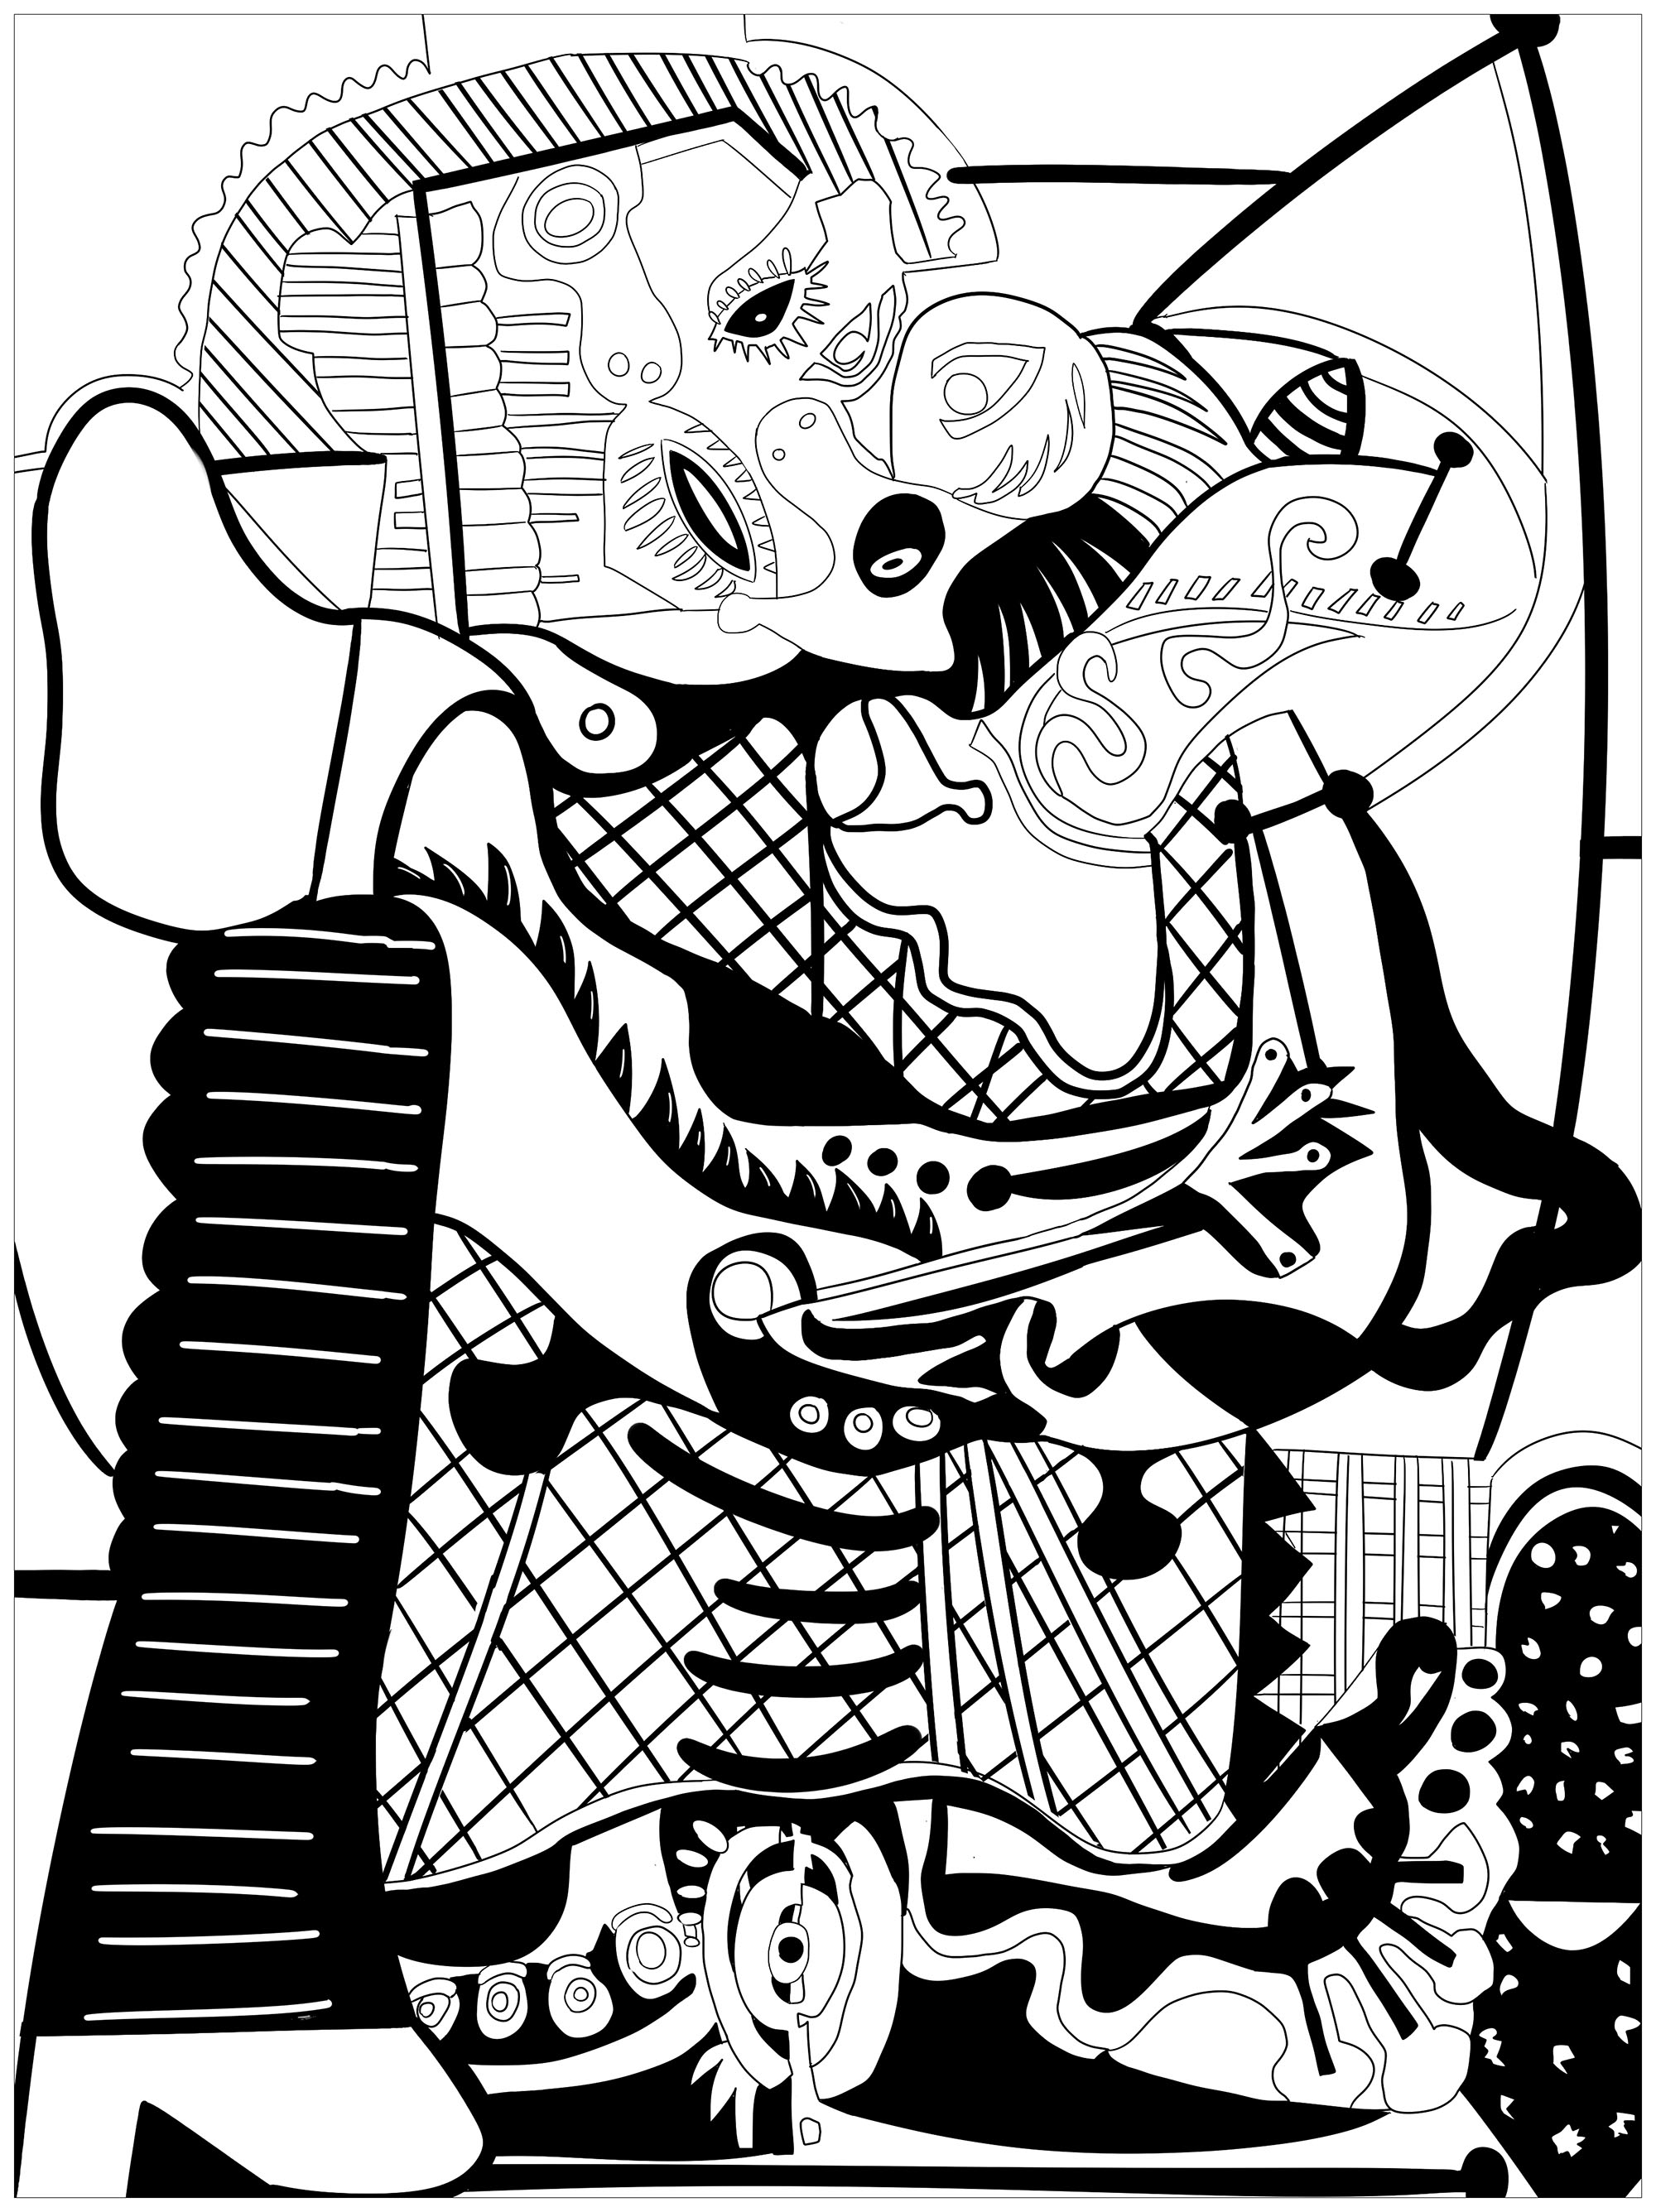 Coloring page inspired by a master piece by Pablo Picasso : The Kiss, Artist : Ji. M